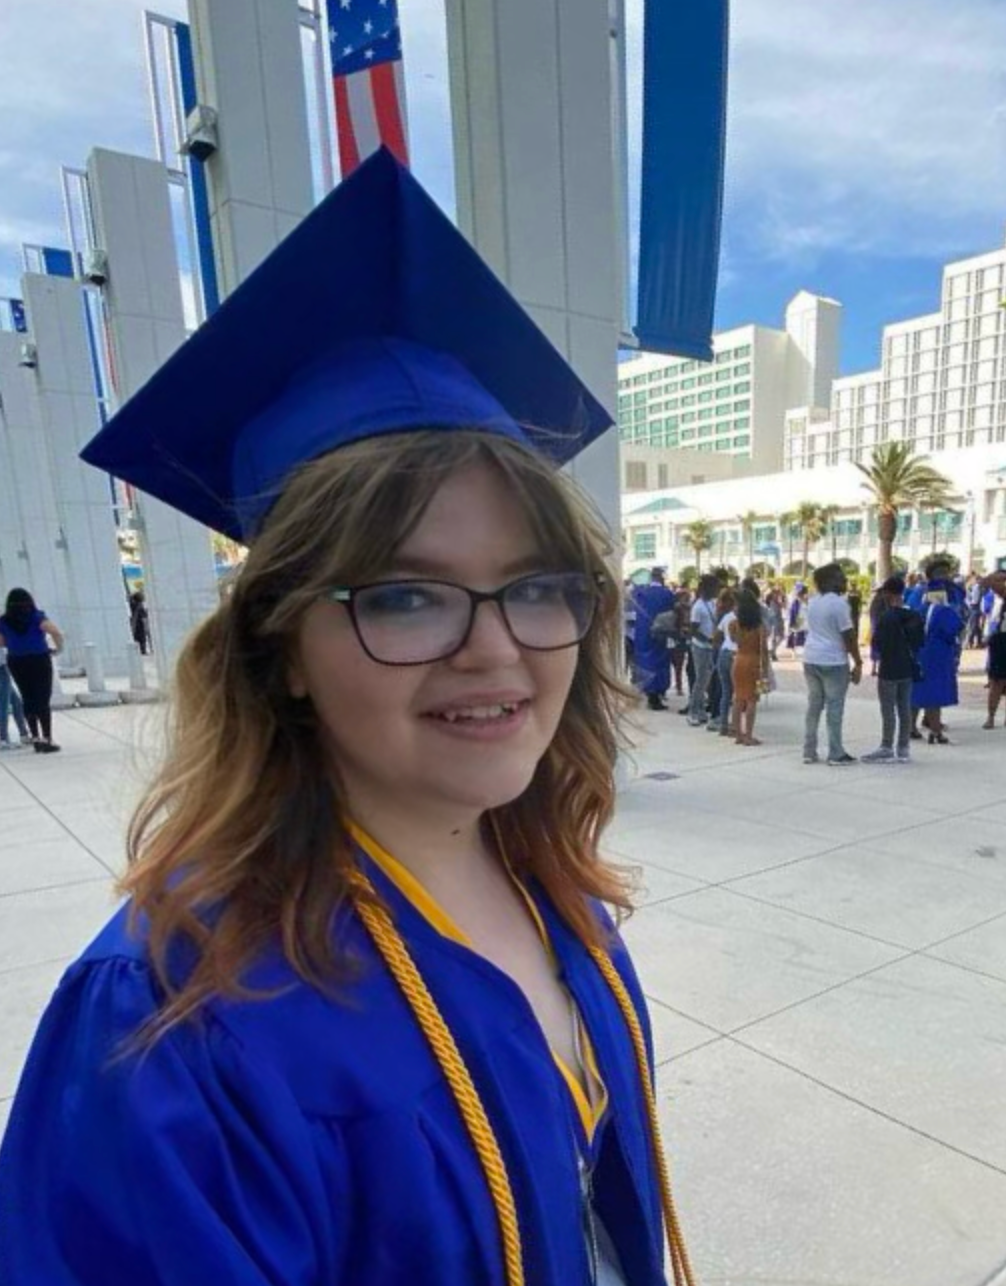 Although she spent the majority of her senior year without a place to call home, Summer Snow graduated as part of Mainland High School's Class of 2023.